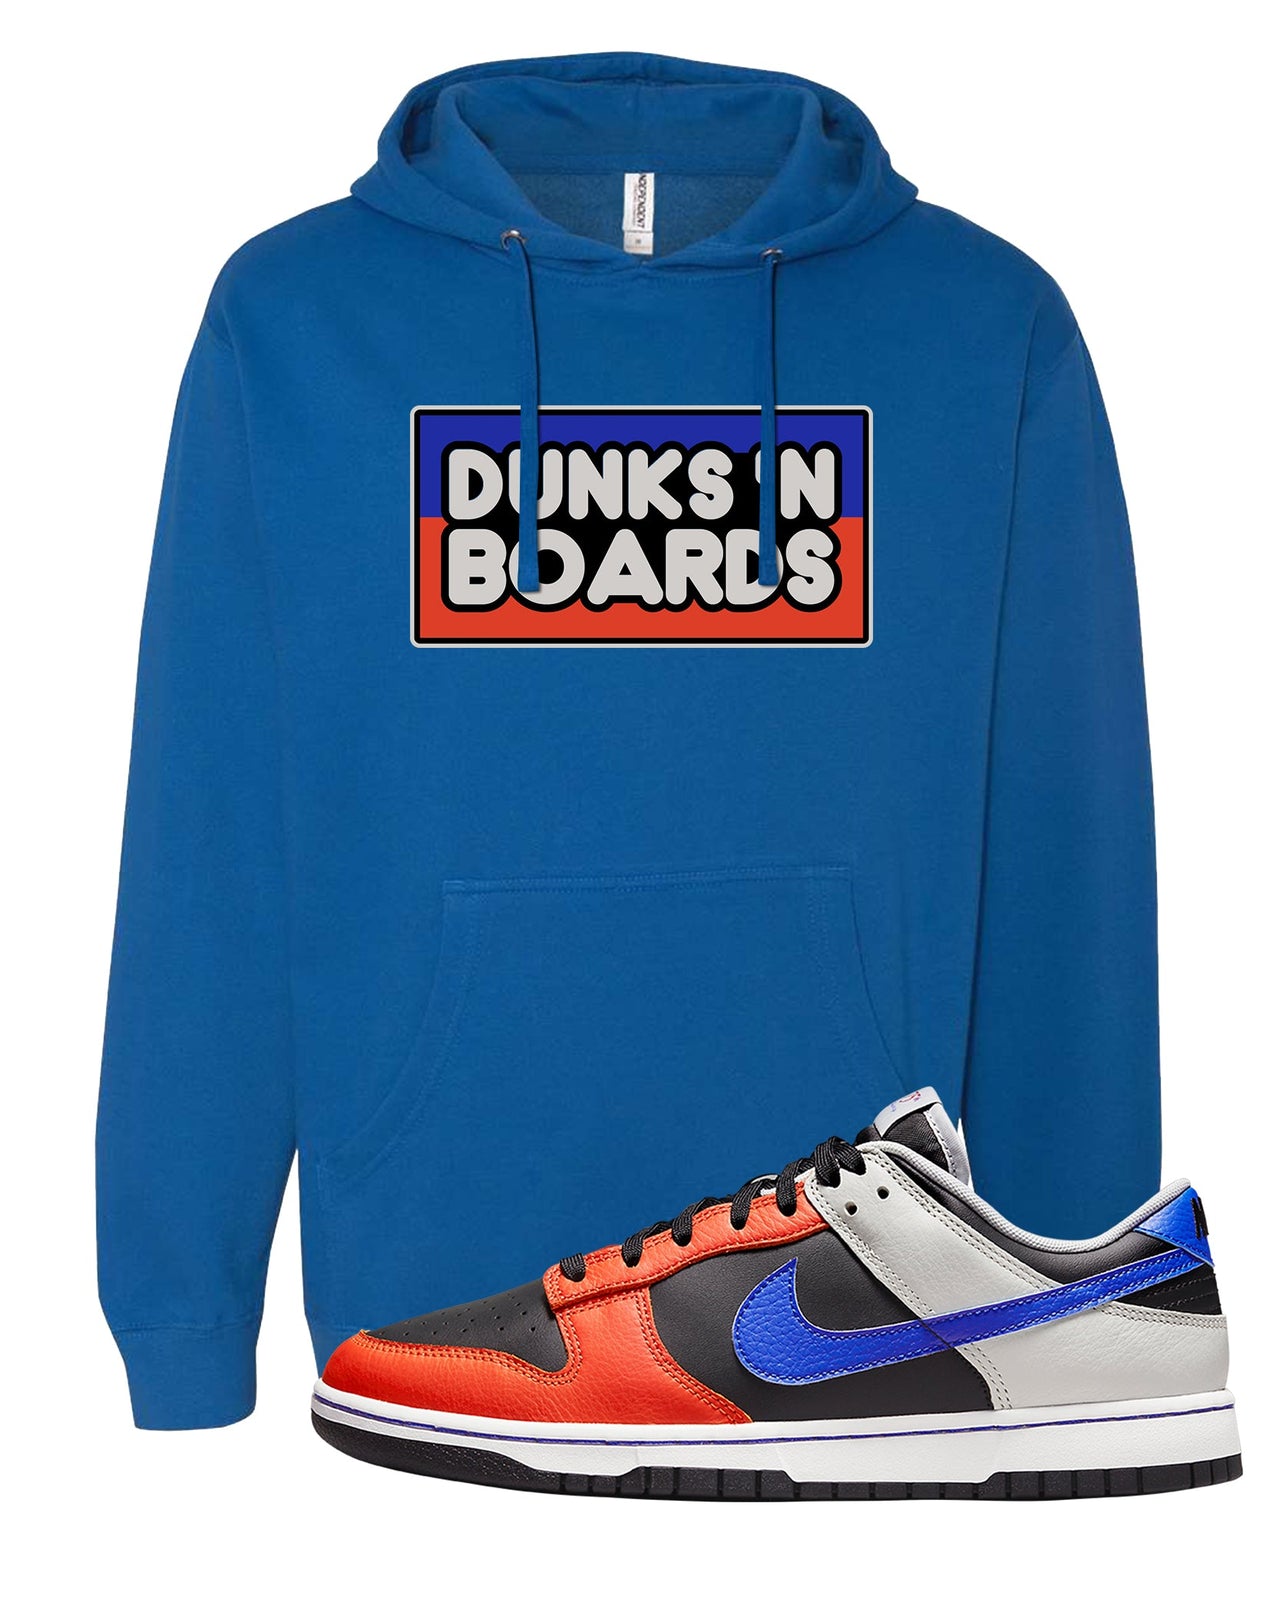 75th Anniversary Low Dunks Hoodie | Dunks N Boards, Royal